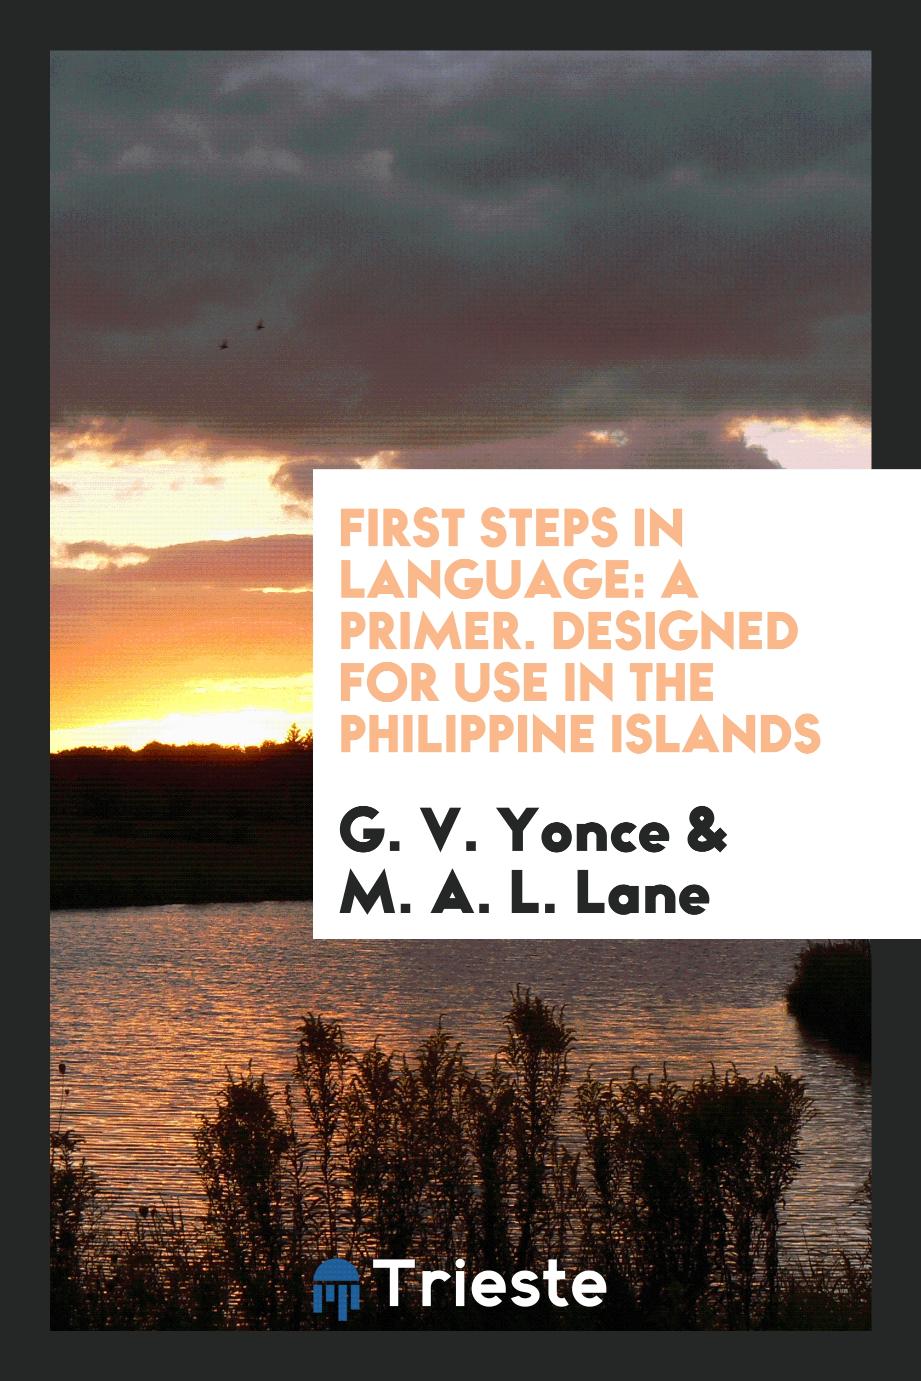 First Steps in Language: A Primer. Designed for Use in the Philippine Islands